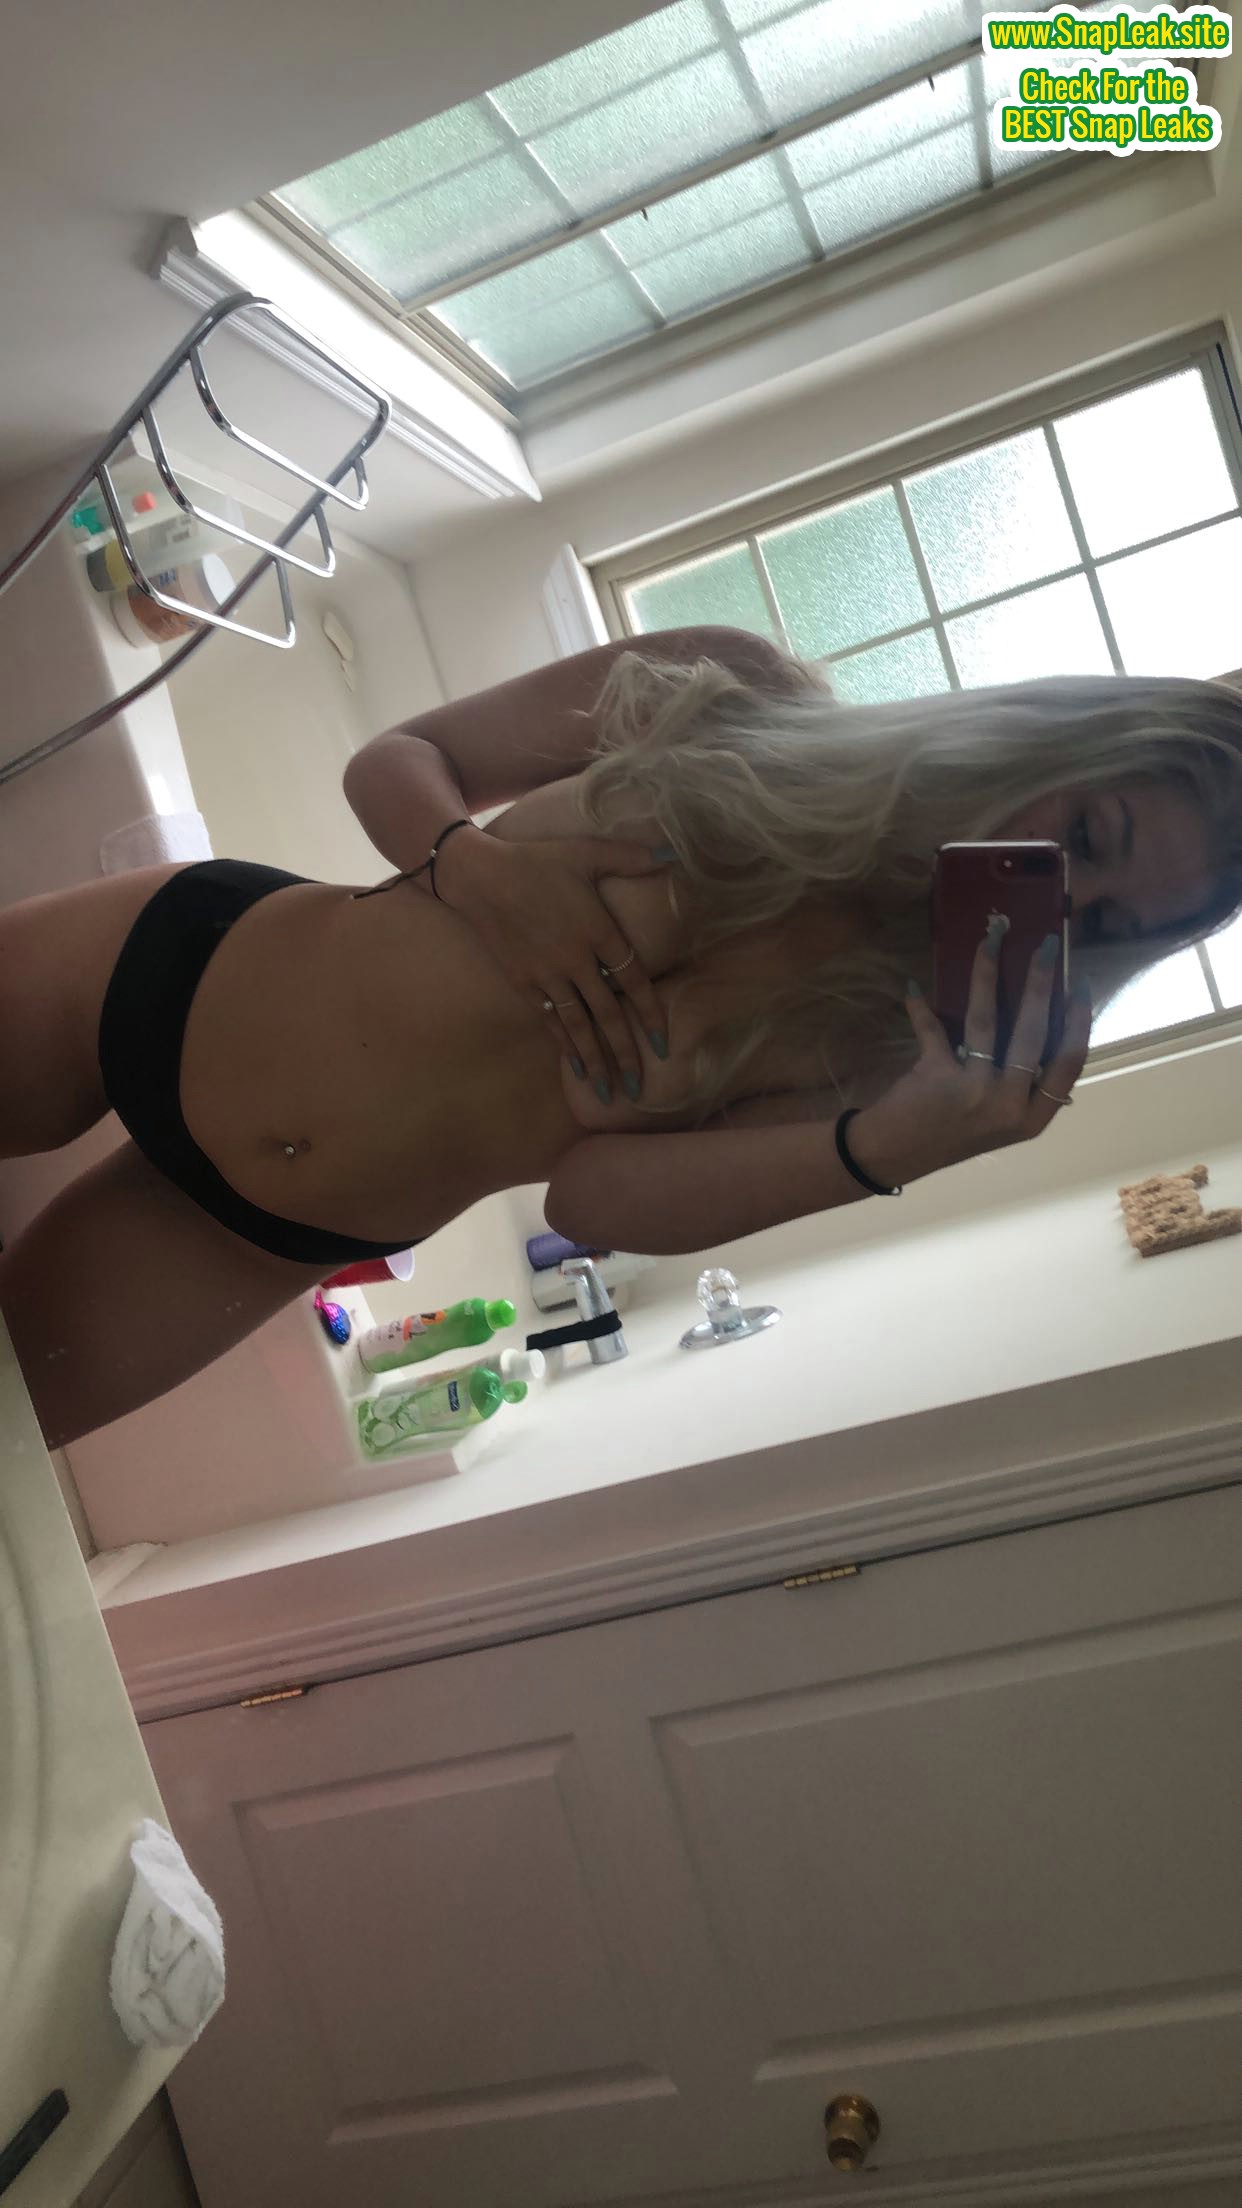 Young Attractive Teen Girl Leaked Snapchat